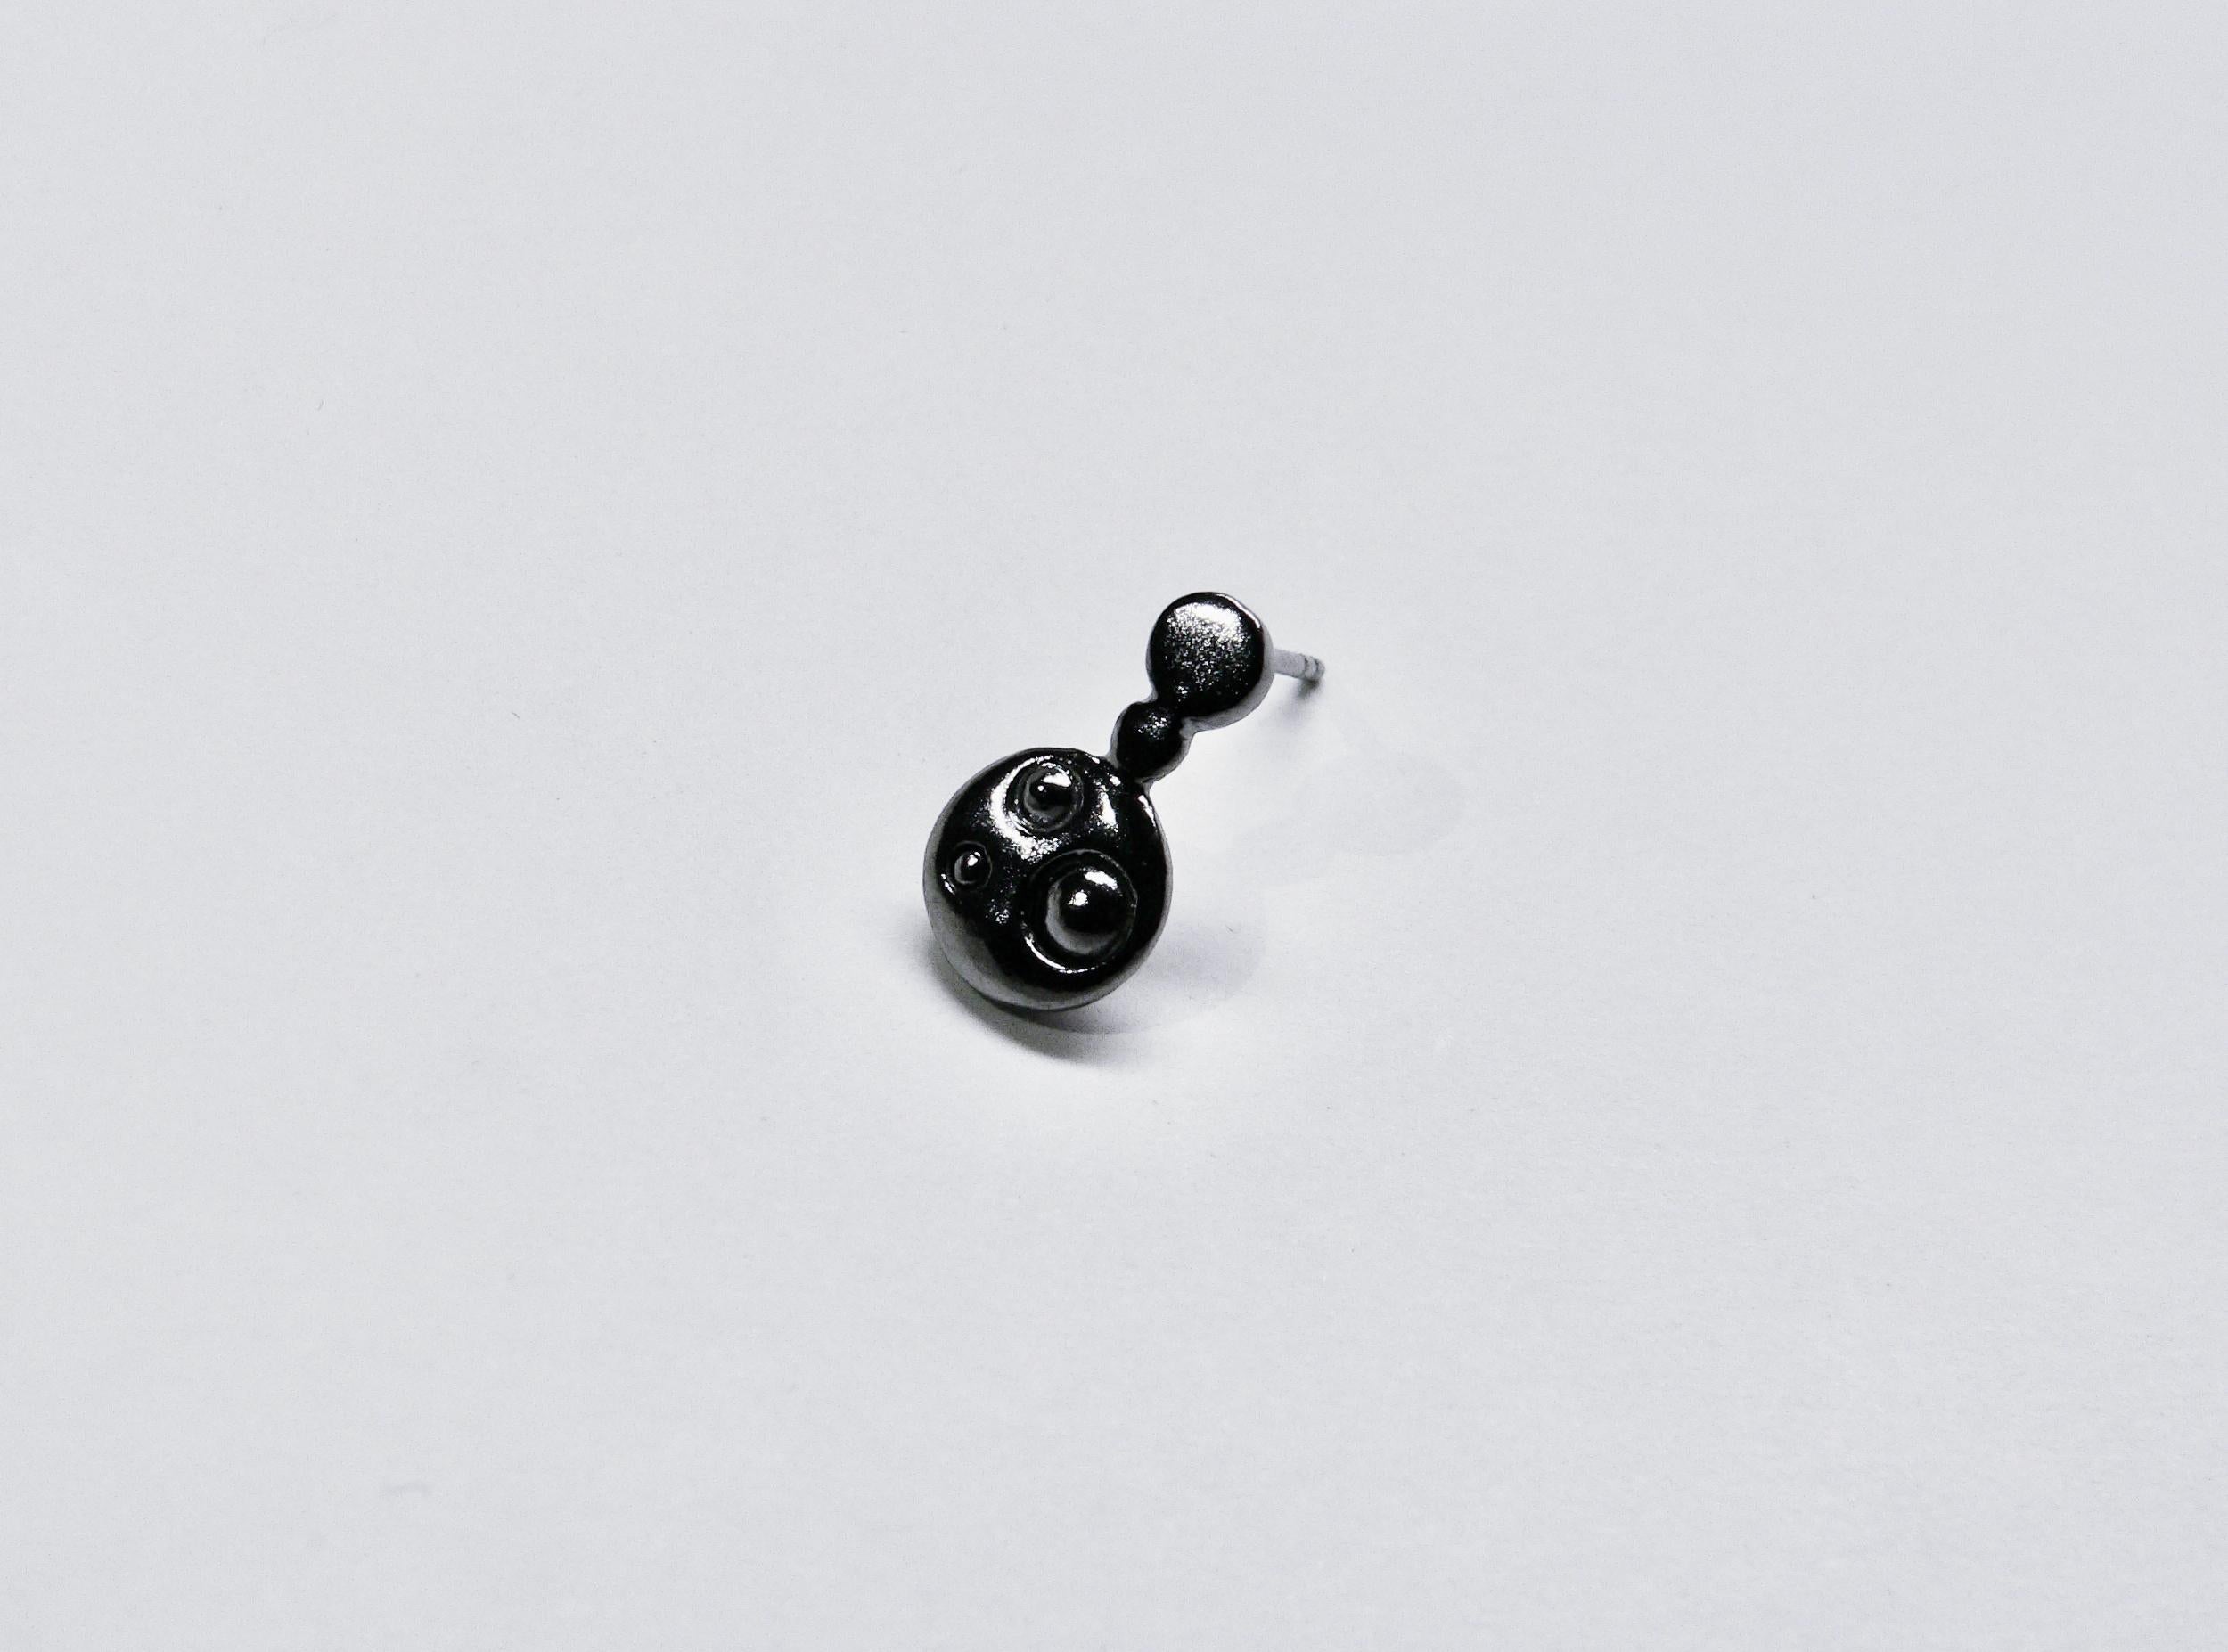 Five Dots Single Stud Earring, Sterling Silver, Black Rhodium-Plated For Sale 2